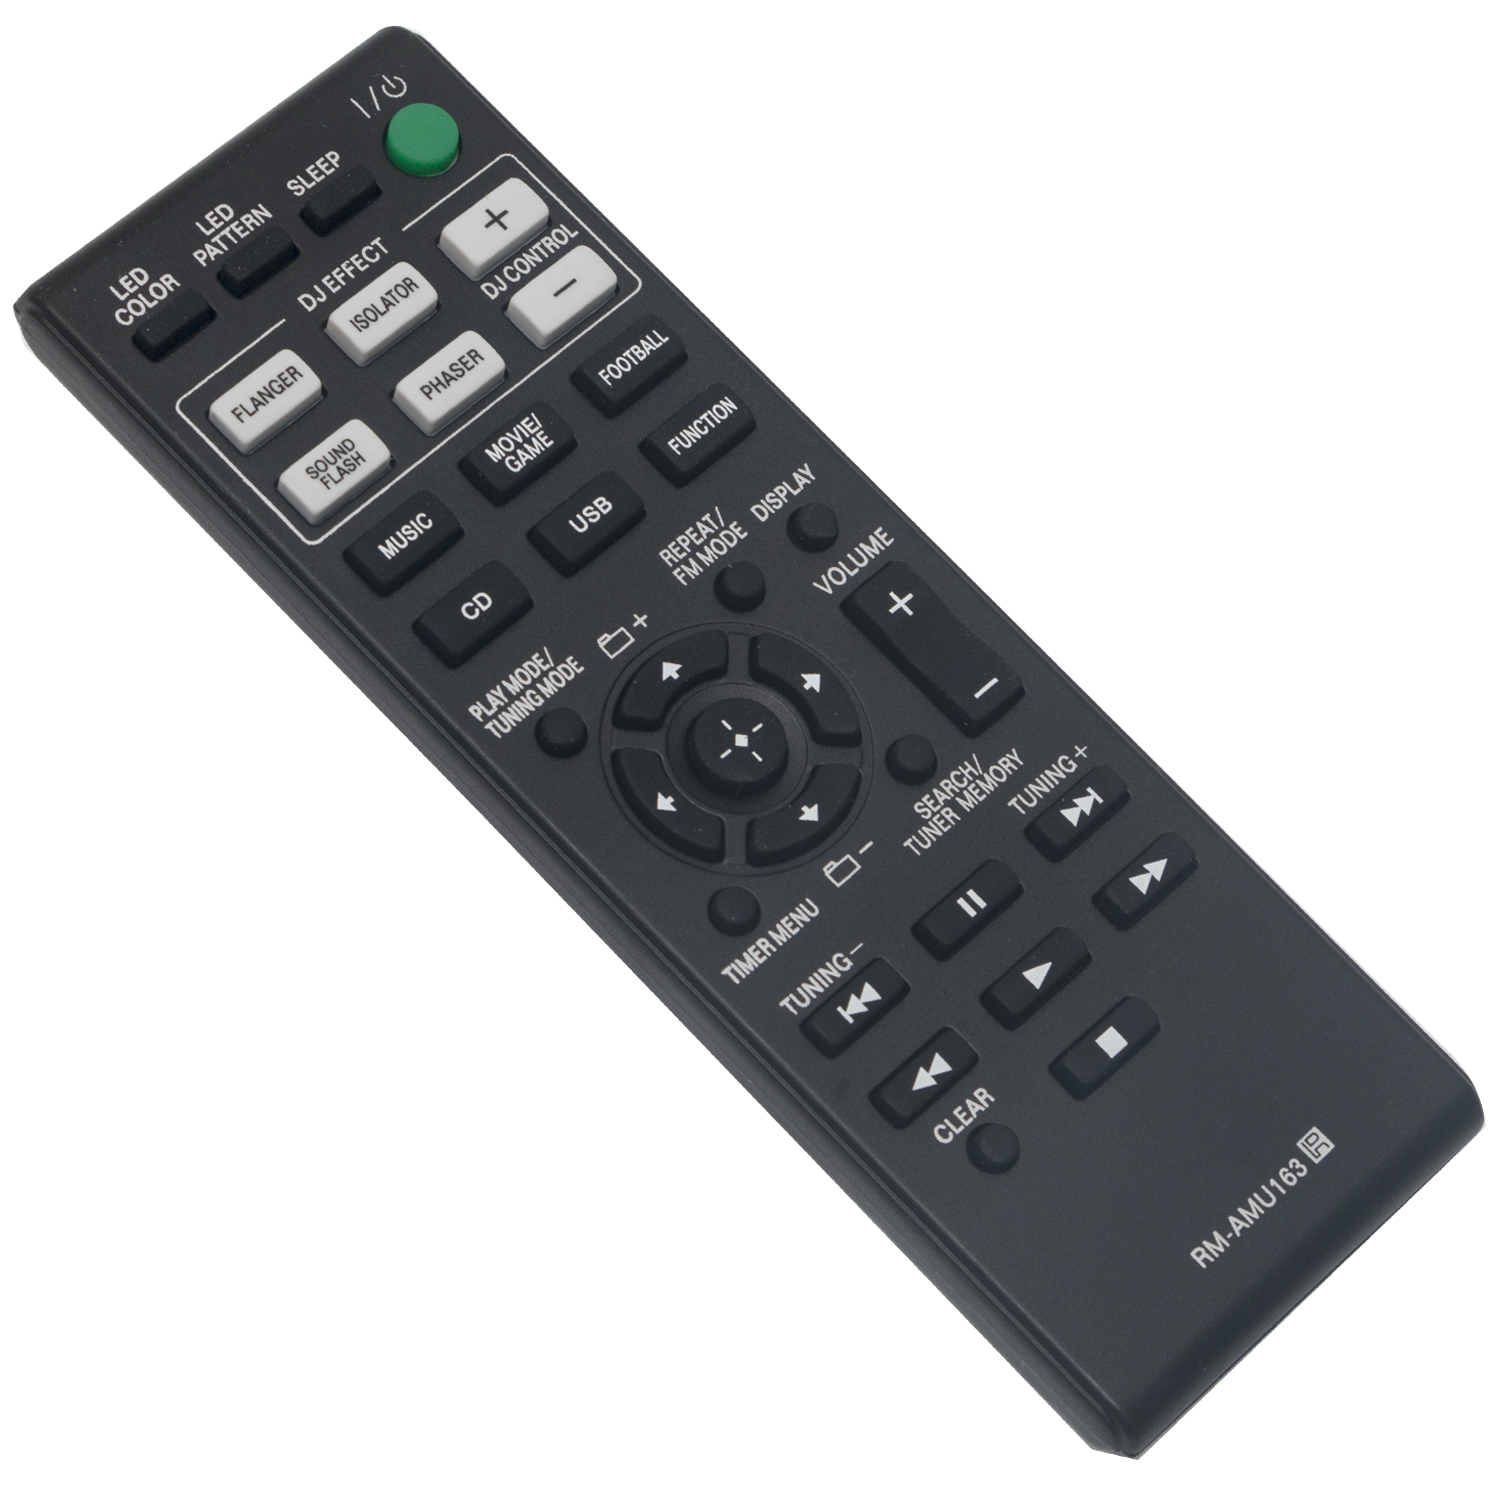 New RM-AMU163 Replaced Remote Control fit for Sony Mini HiFi Component System HCD-GPX55 LBT-GPX55 LBT-GPX77 SS-WGP55 SS-GPX55 - image 3 of 4